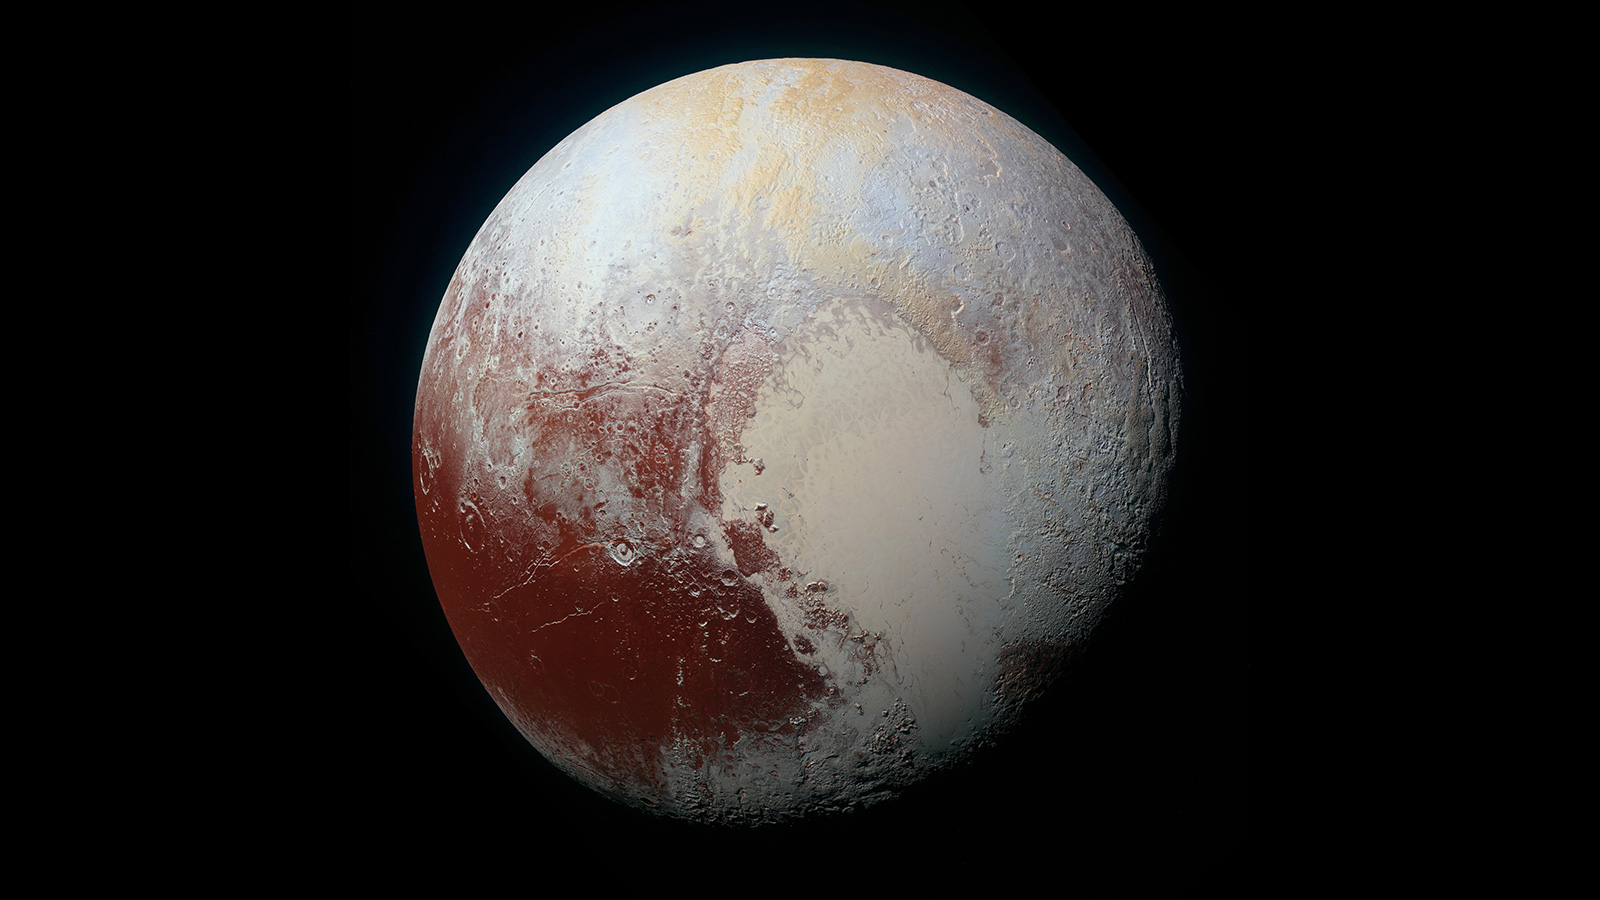 slide 3 - Image of Pluto from New Horizons spacecraft